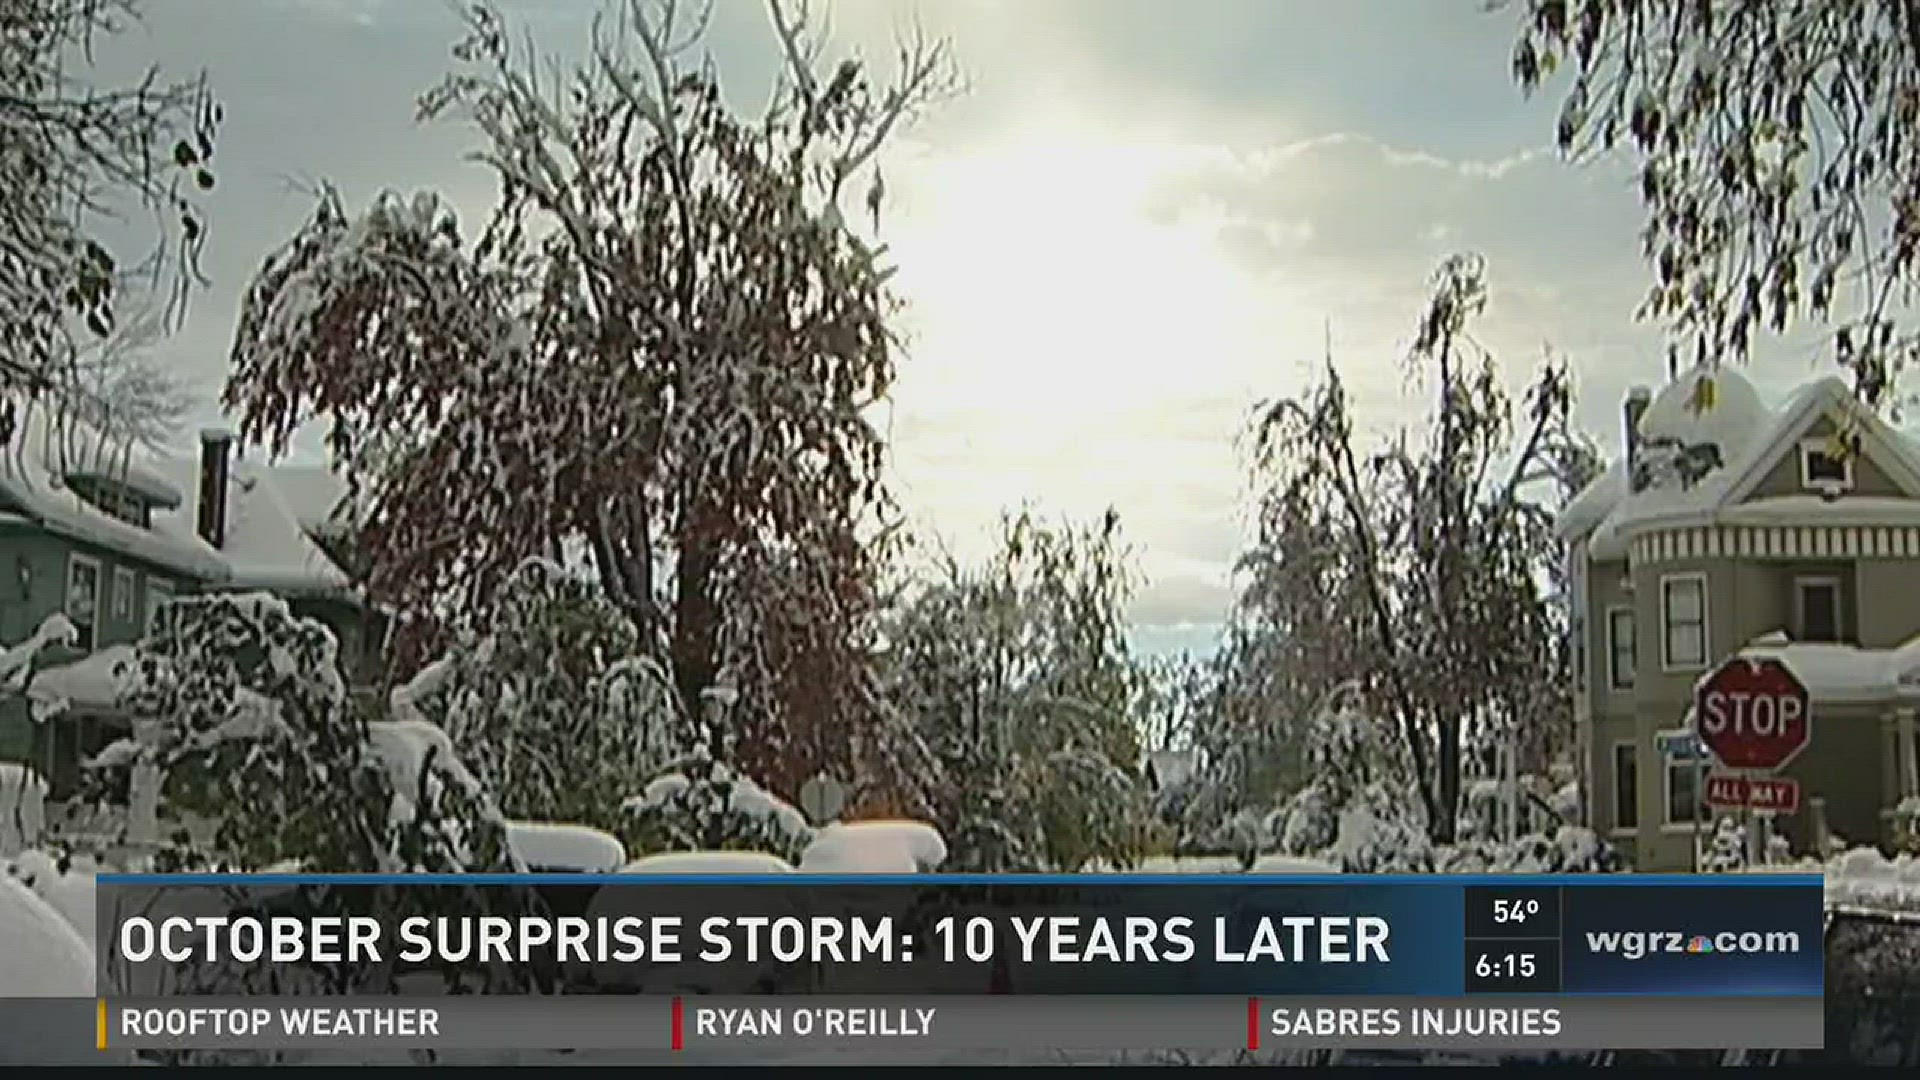 October Surprise Storm: 10 Years Later